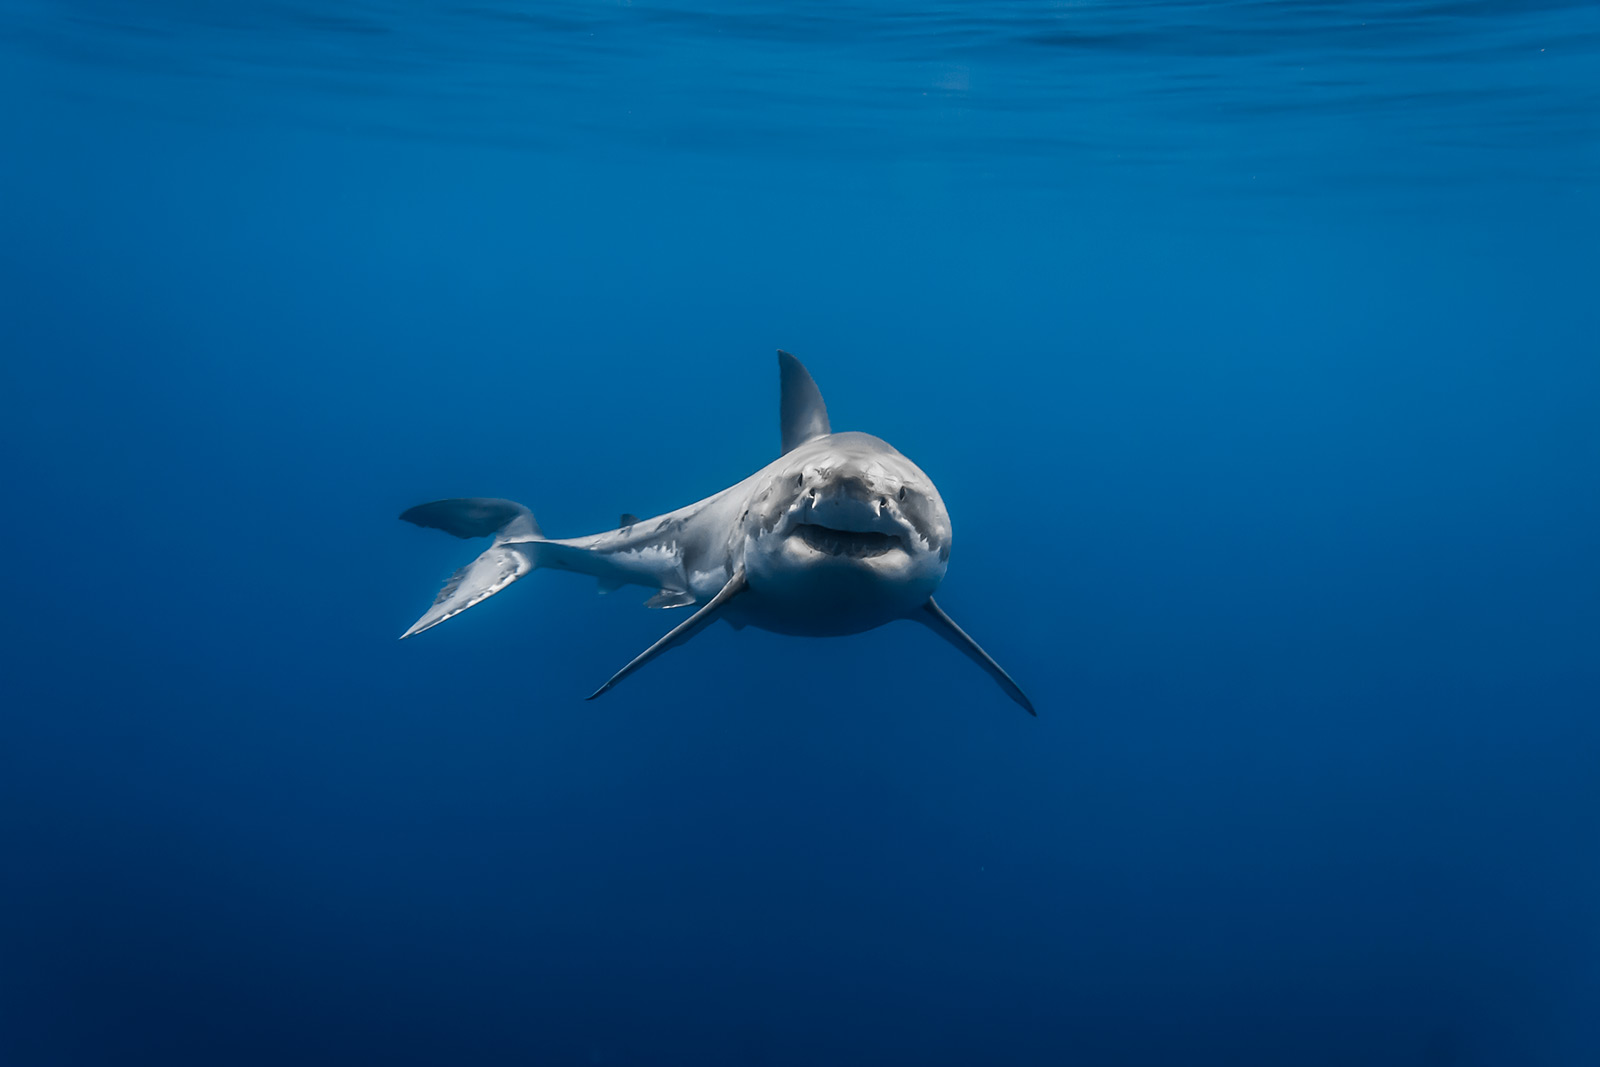 Lucy, a female great white shark, looks at the camera from a distance image